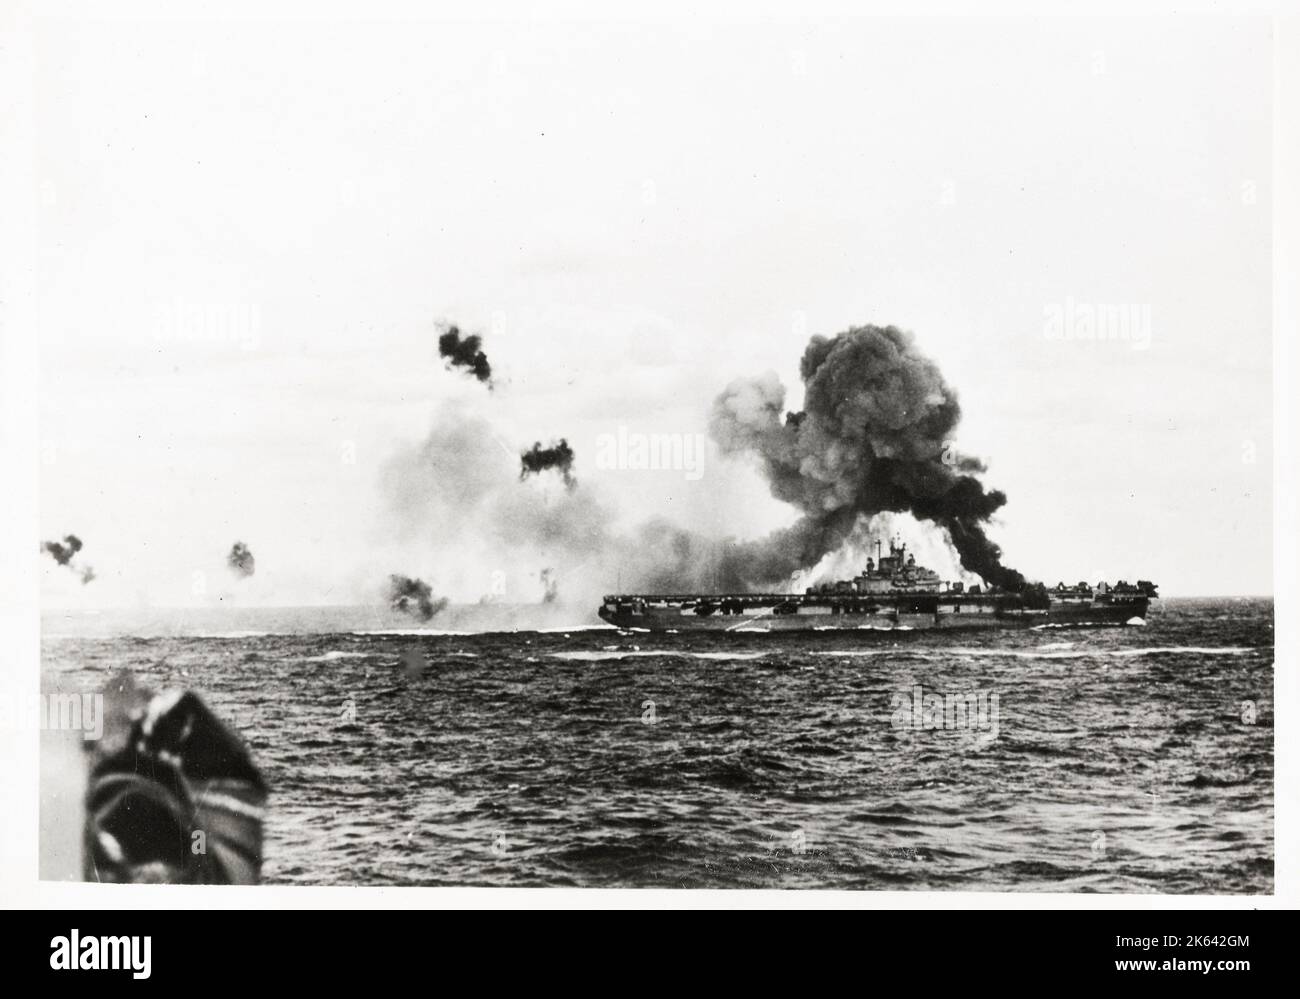 World War II vintage photograph - fire on USS Intrepid aircraft caarrier after near miss from Japanese aircraft suicide attack Stock Photo